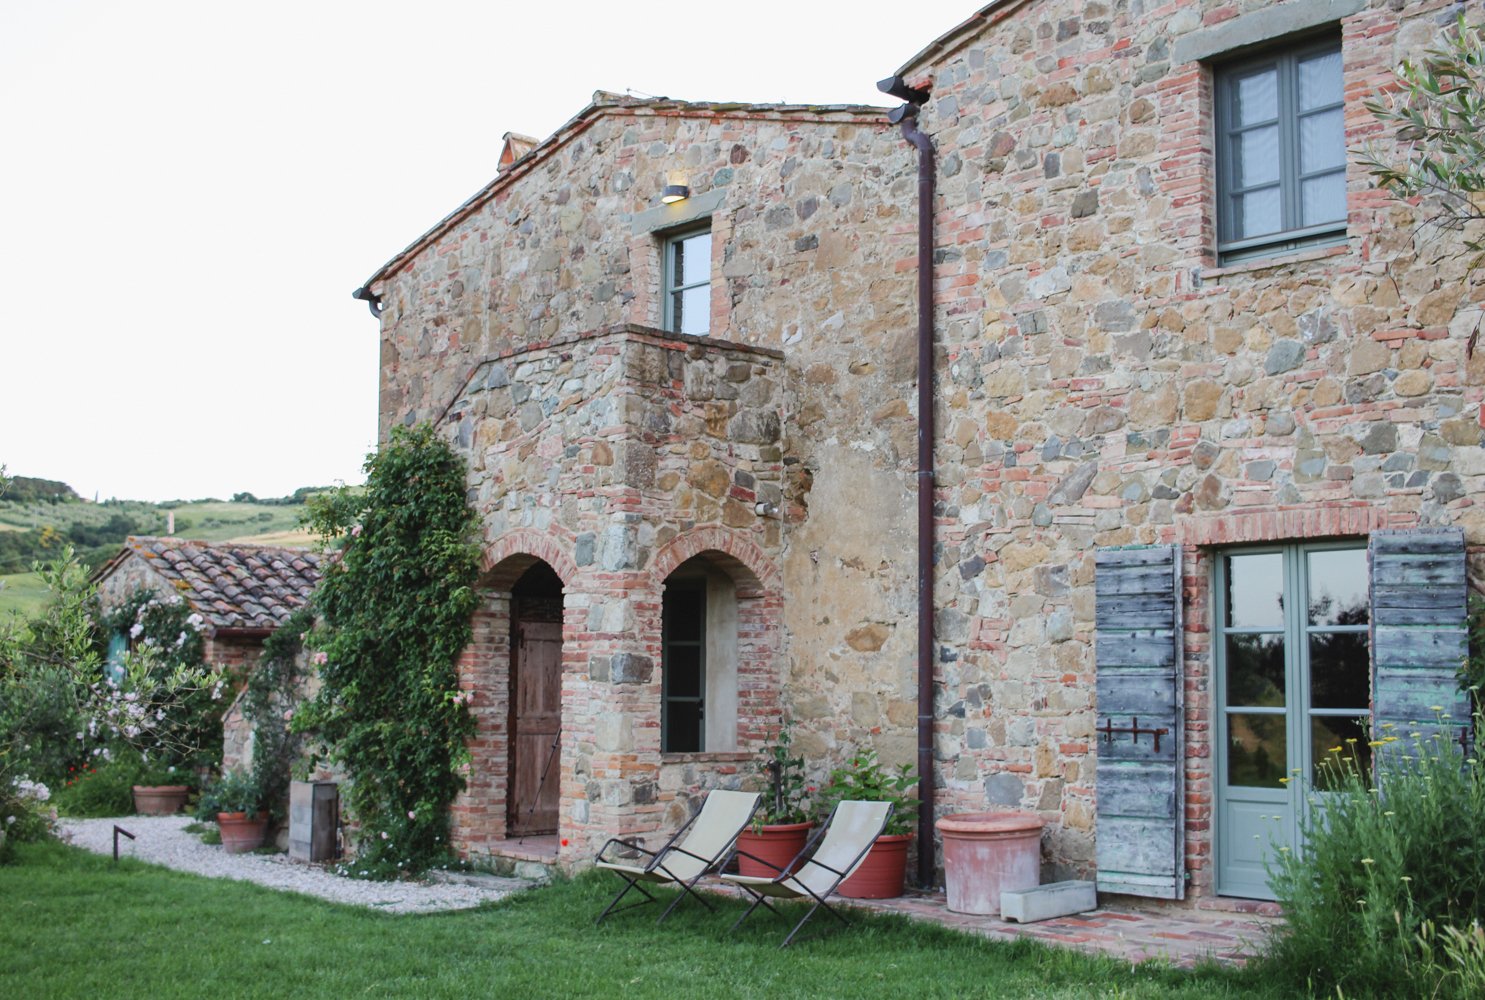 Where to stay in Tuscany